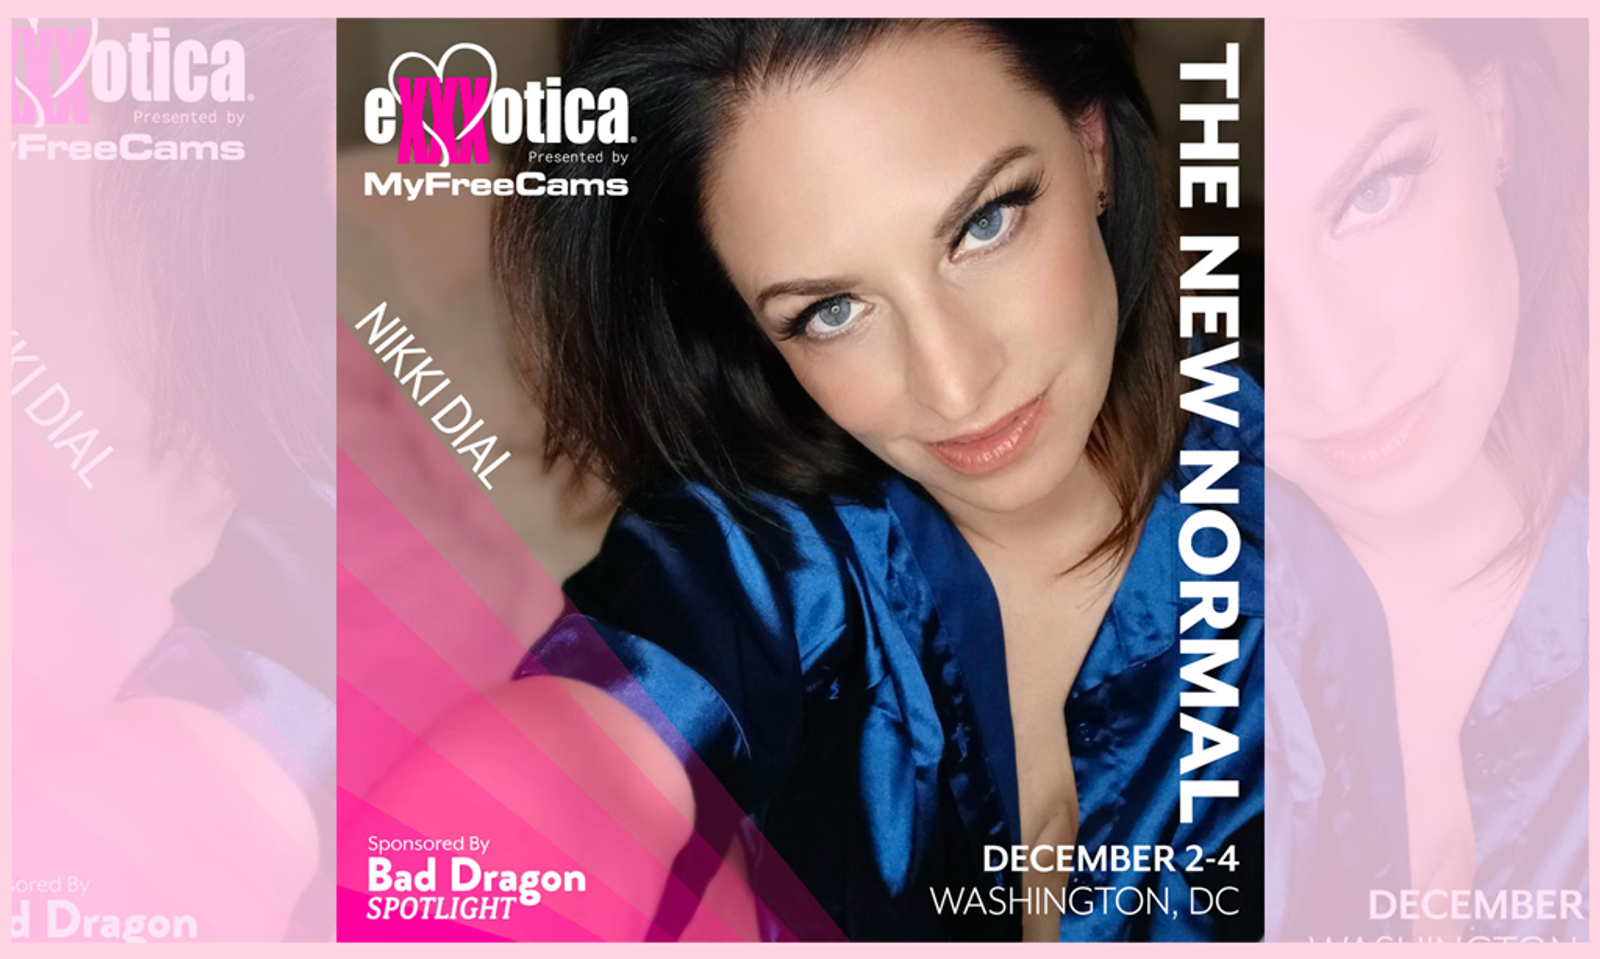 Hall of Fame Adult Actress Nikki Dial to Appear at Exxxotica DC